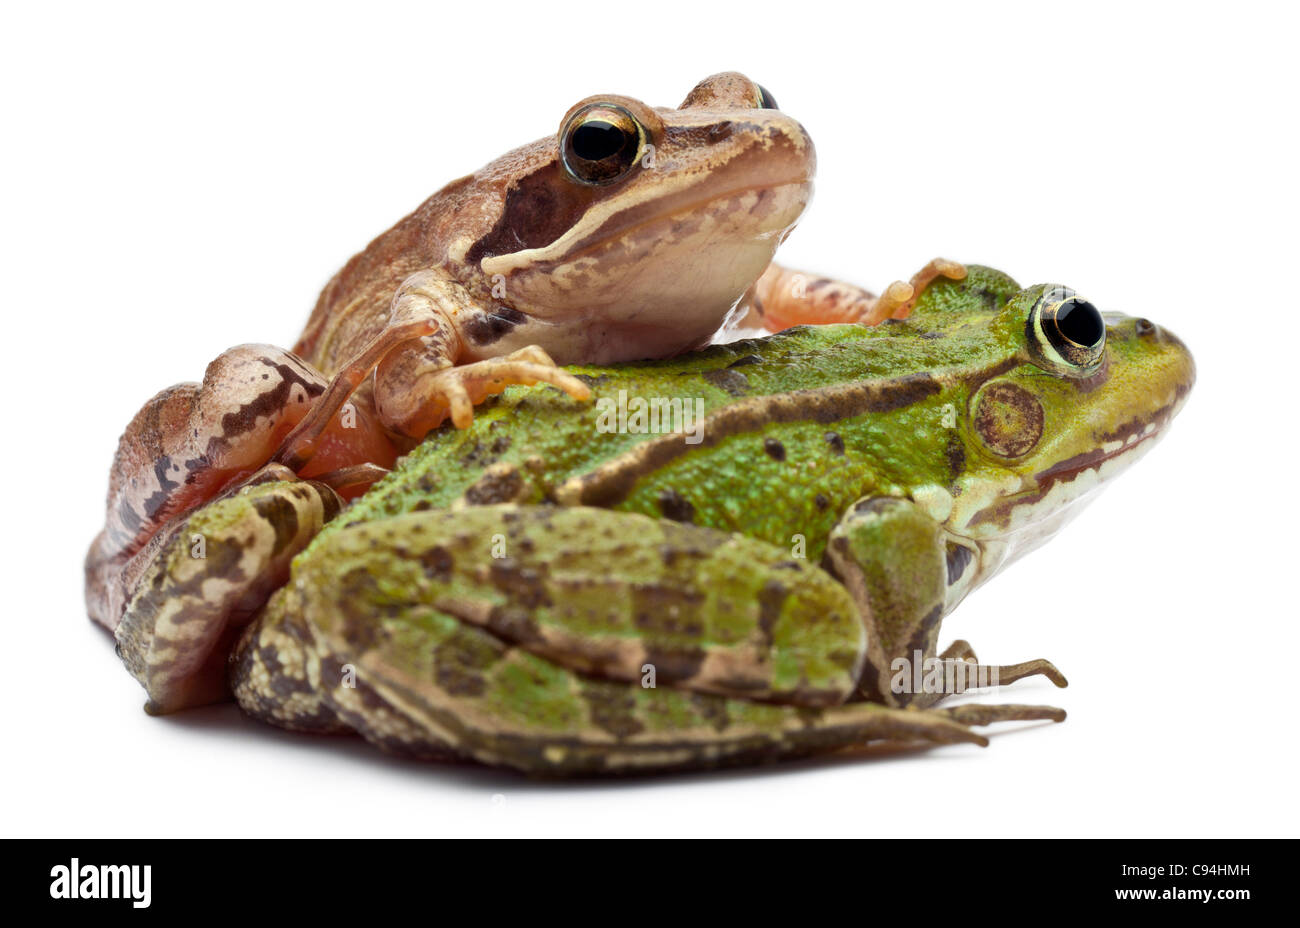 Common European frog or Edible Frog, Rana esculenta, and a Moor Frog, Rana arvalis, in front of white background Stock Photo